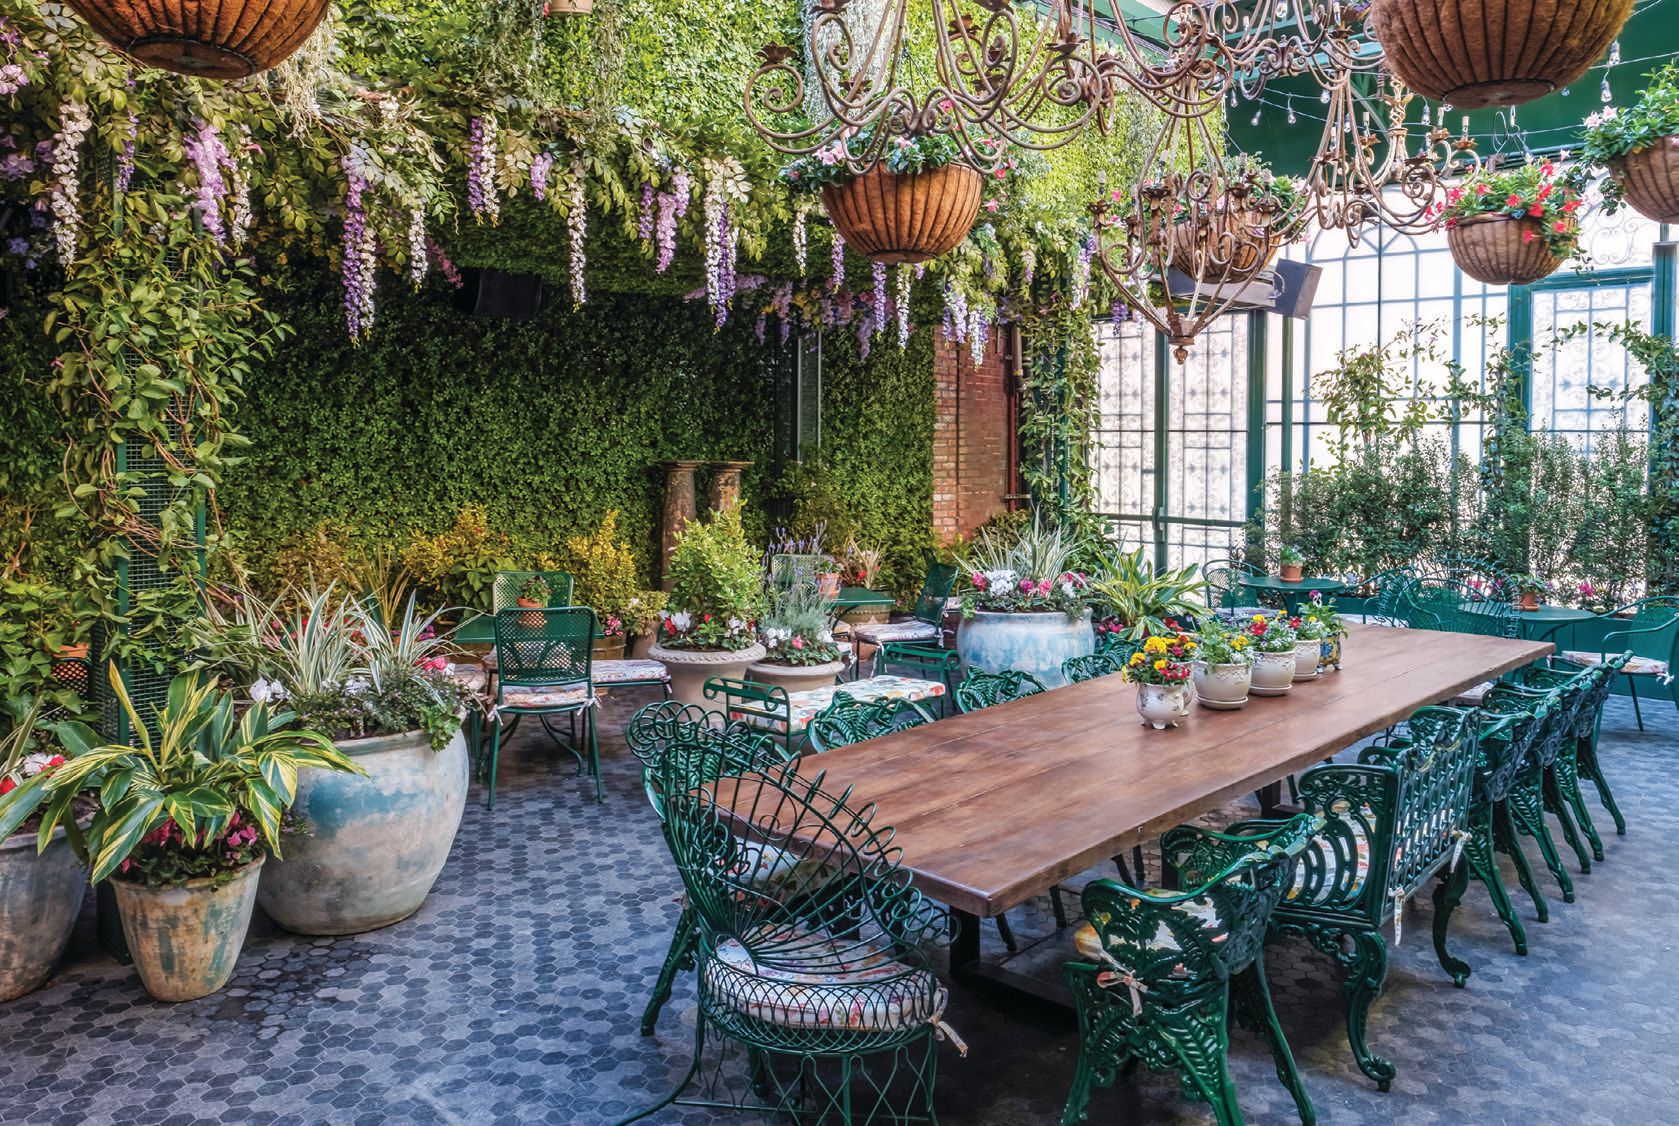 The English garden-inspired patio at new Hollywood Vinyl District pub The Chap PHOTO BY RICHARD STOWE